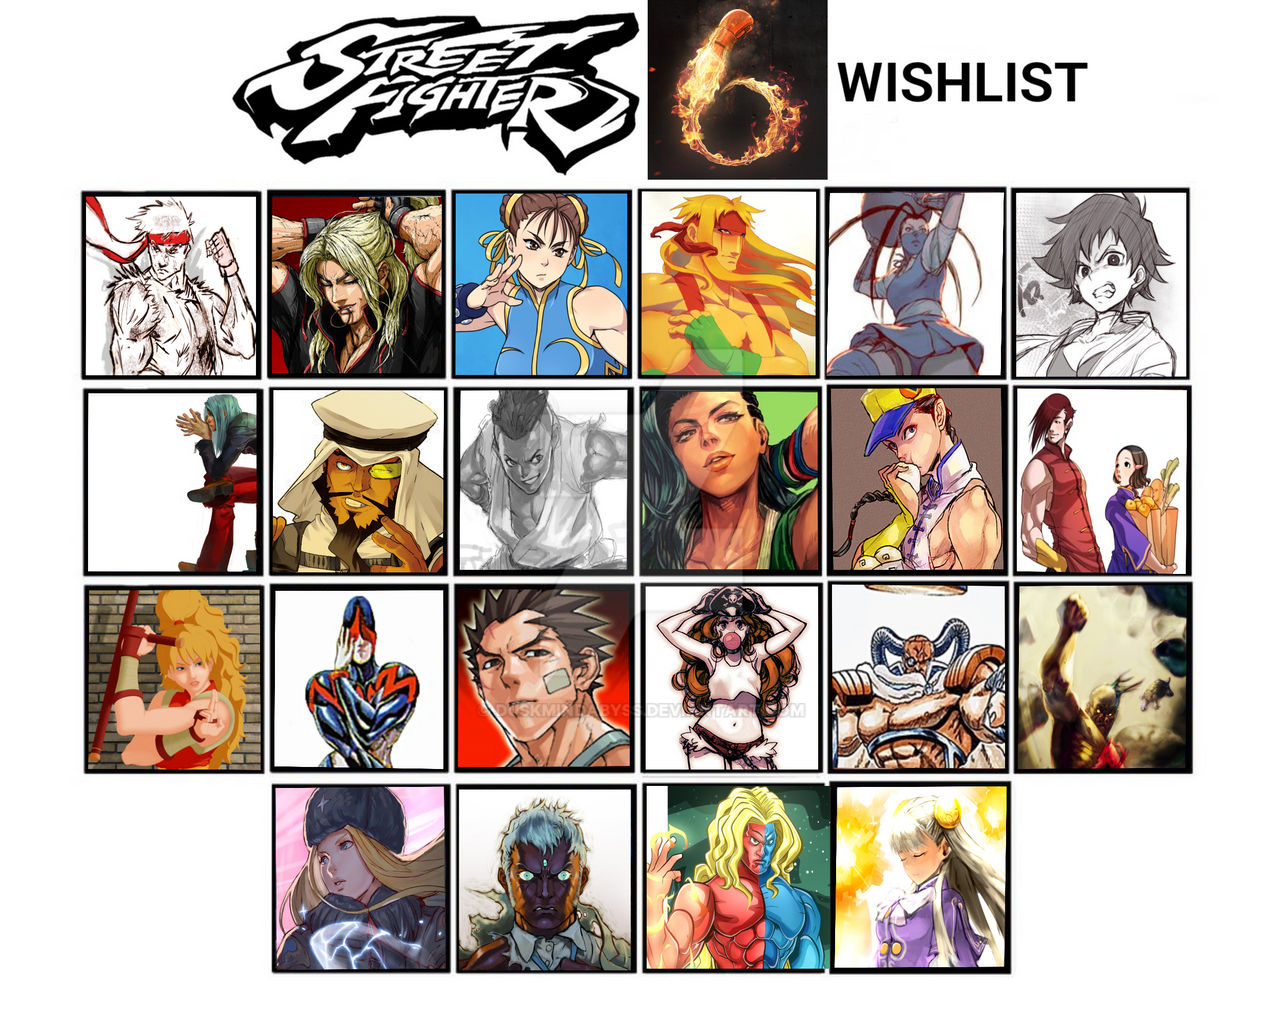 CHARACTERS, STREET FIGHTER 6